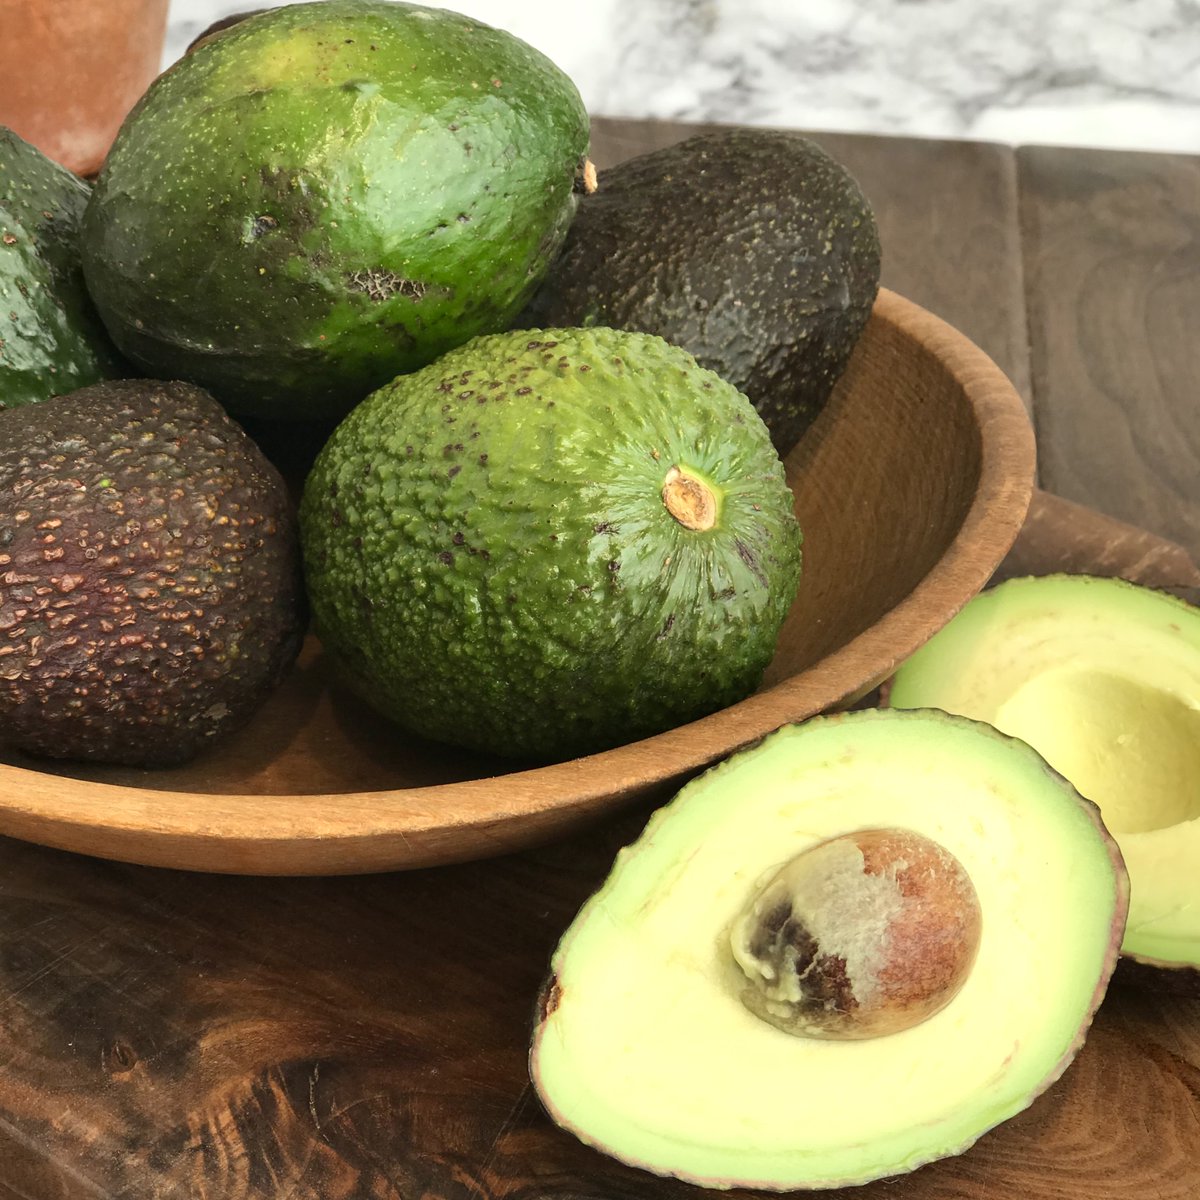 Eat up! Avocados have more potassium than bananas. They're loaded with fiber, boost the immune system and provide a dose of healthy antioxidants. Organic avocados are 2/$3, now through Aug. 8. #shopcoop #oneotacoop #foodcoop #decorah #downtowndecorah